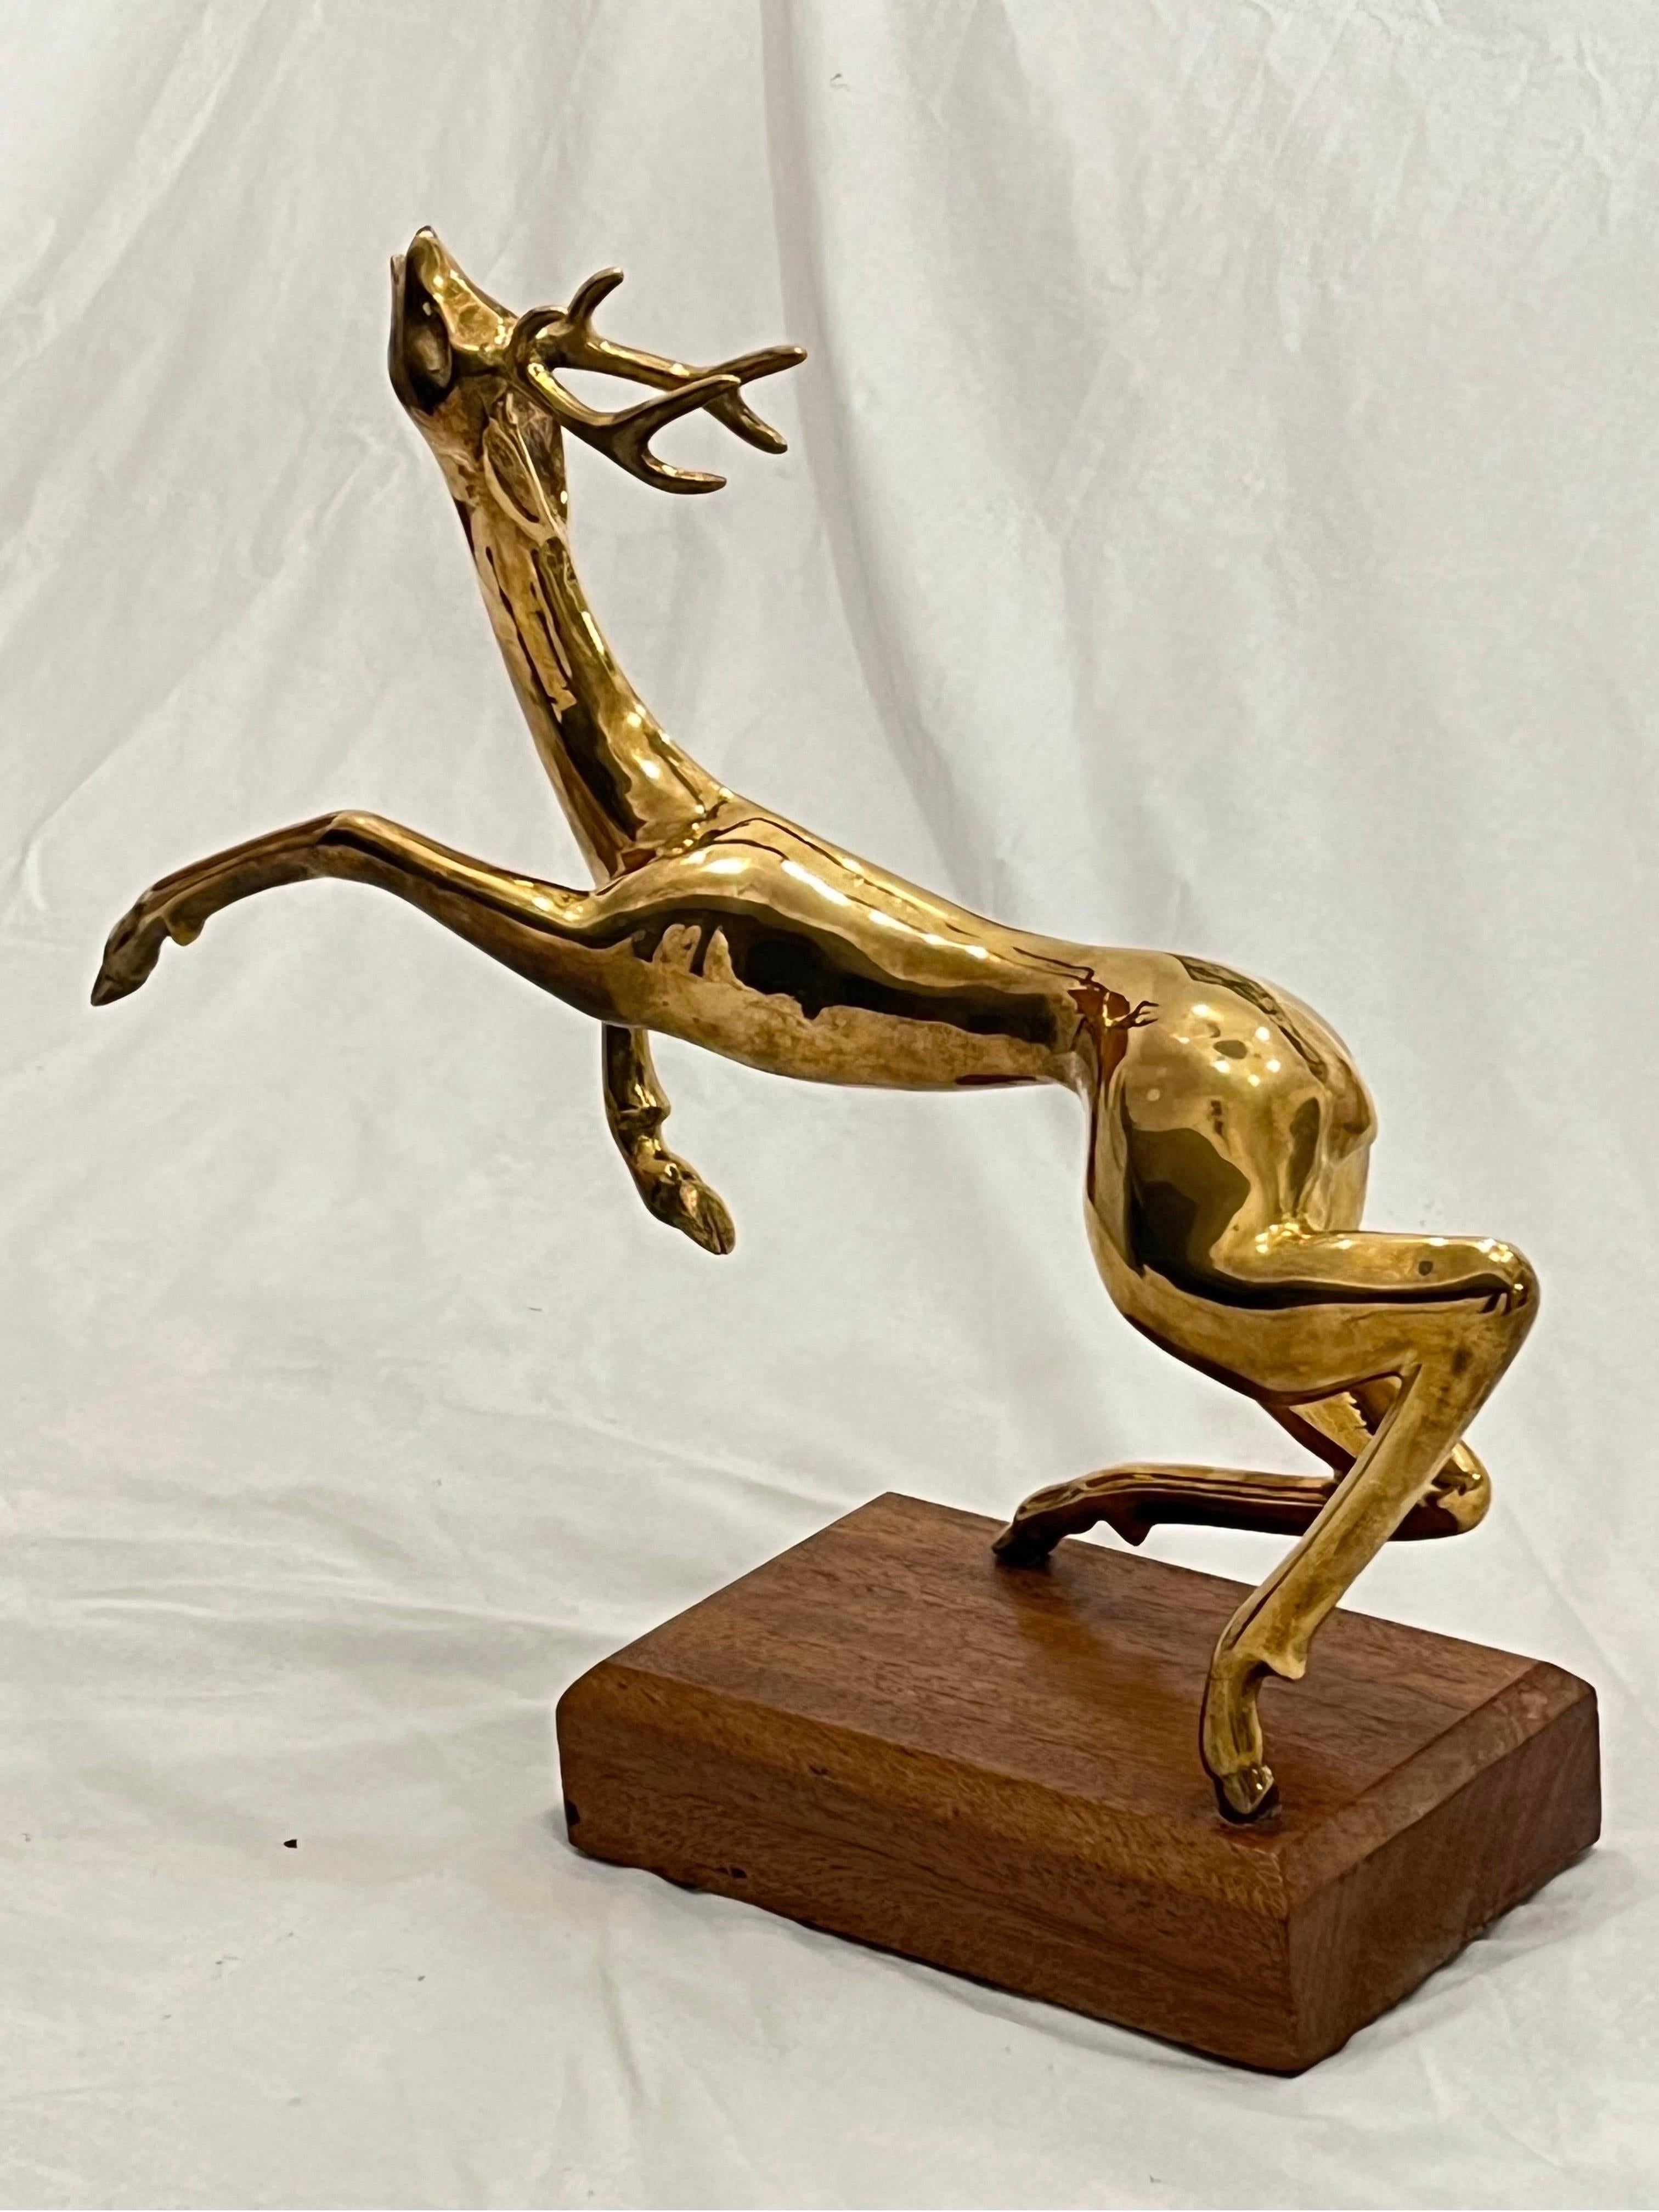 Vintage Thai Somchai Hattakitkosol Signed Solid Bronze Sculpture of Leaping Deer For Sale 5